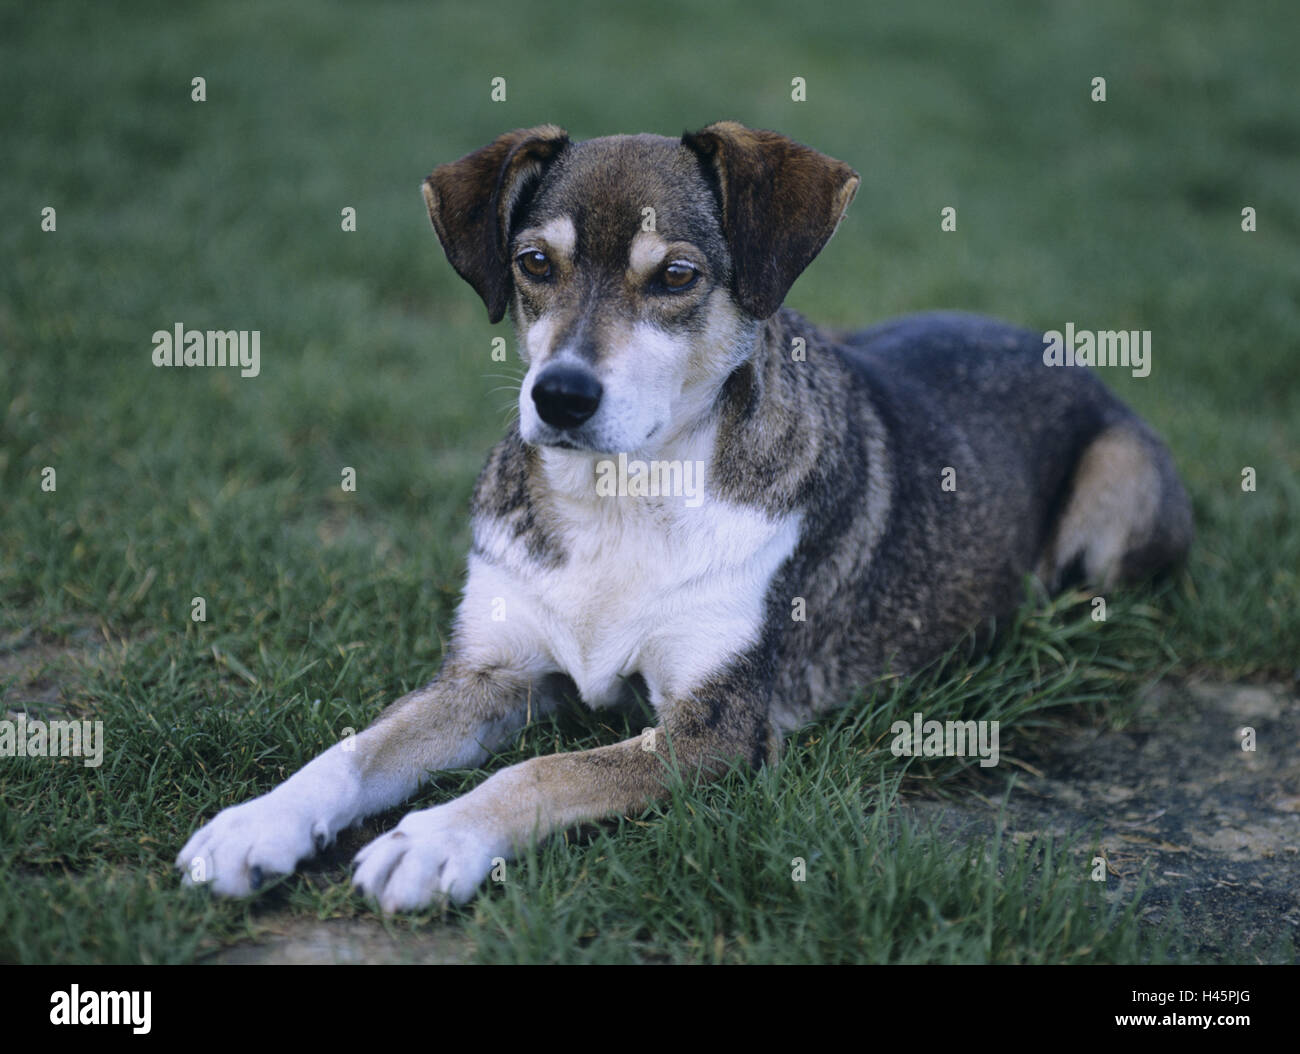 lie half-breed dog, meadow,  Vigilance,   Animal, mammal, dog, pet, house dog, half-breed, promenade half-breed, attention, education, obedience, outside, Stock Photo